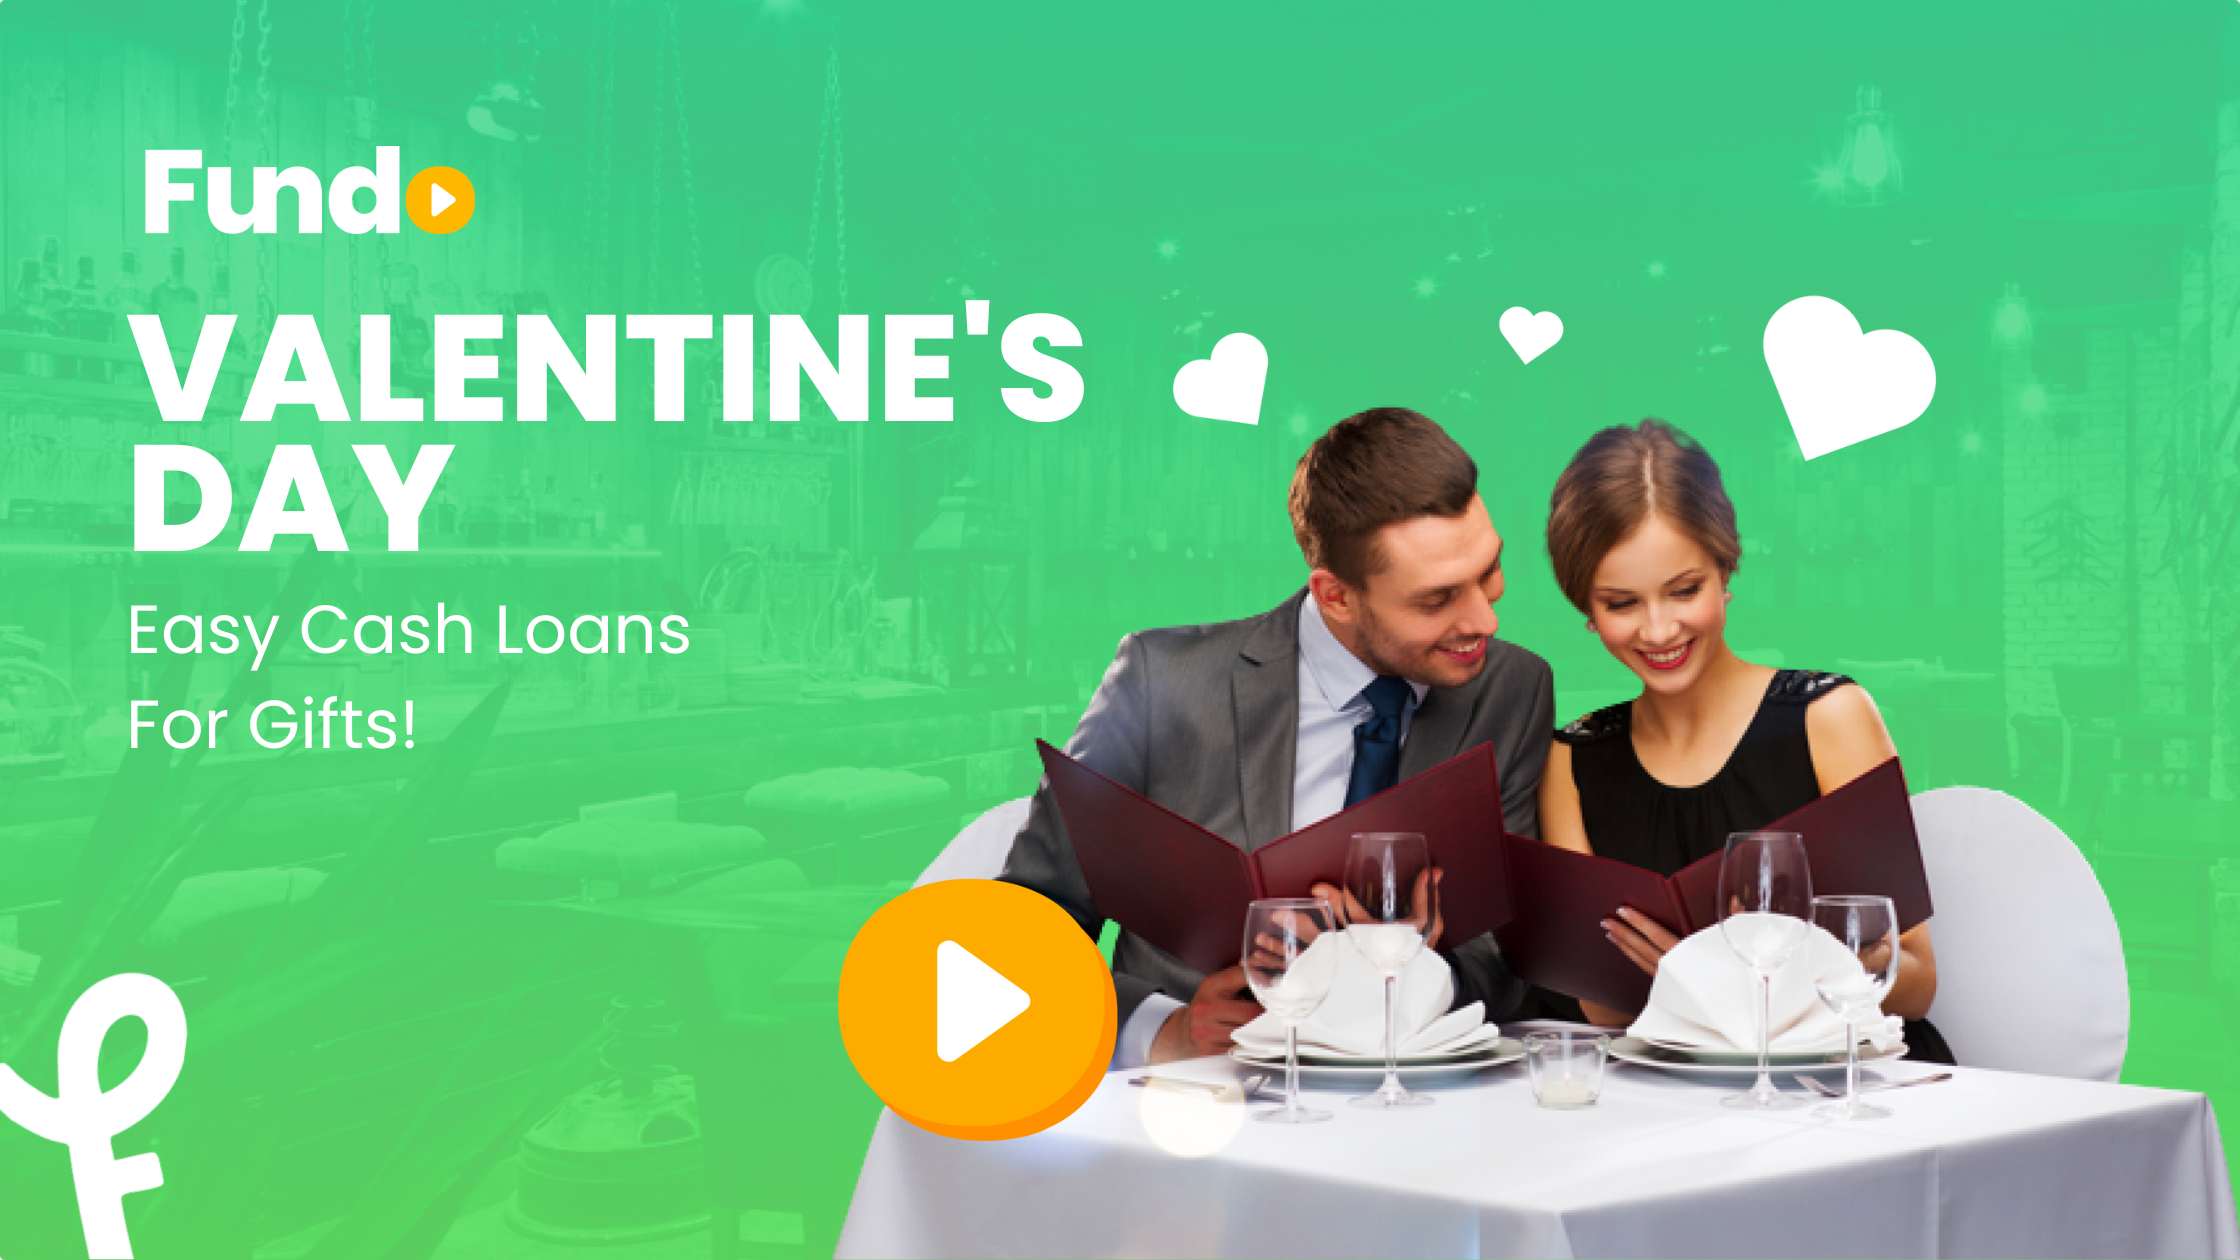 Easy Cash Loans for Gifts this Valentine’s Day!